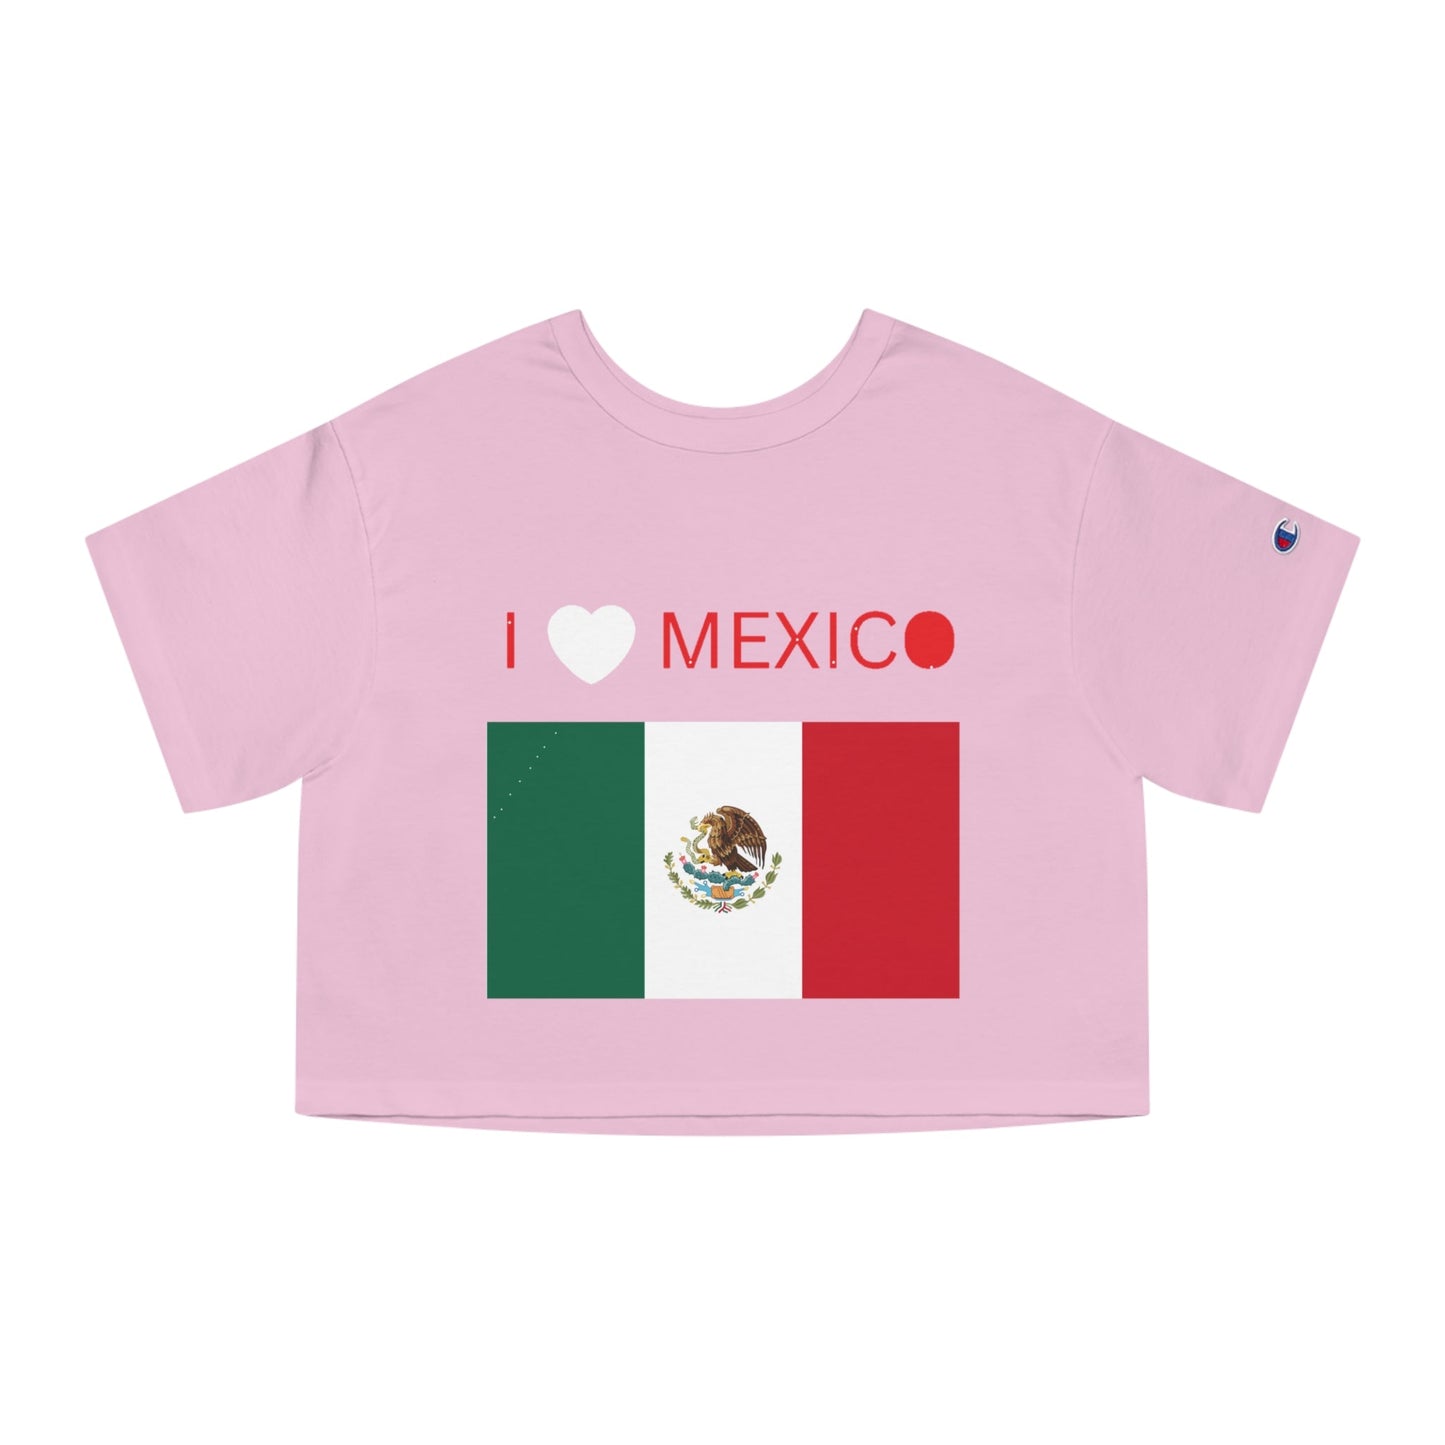 Mexico Champion Women's Heritage Cropped T-Shirt